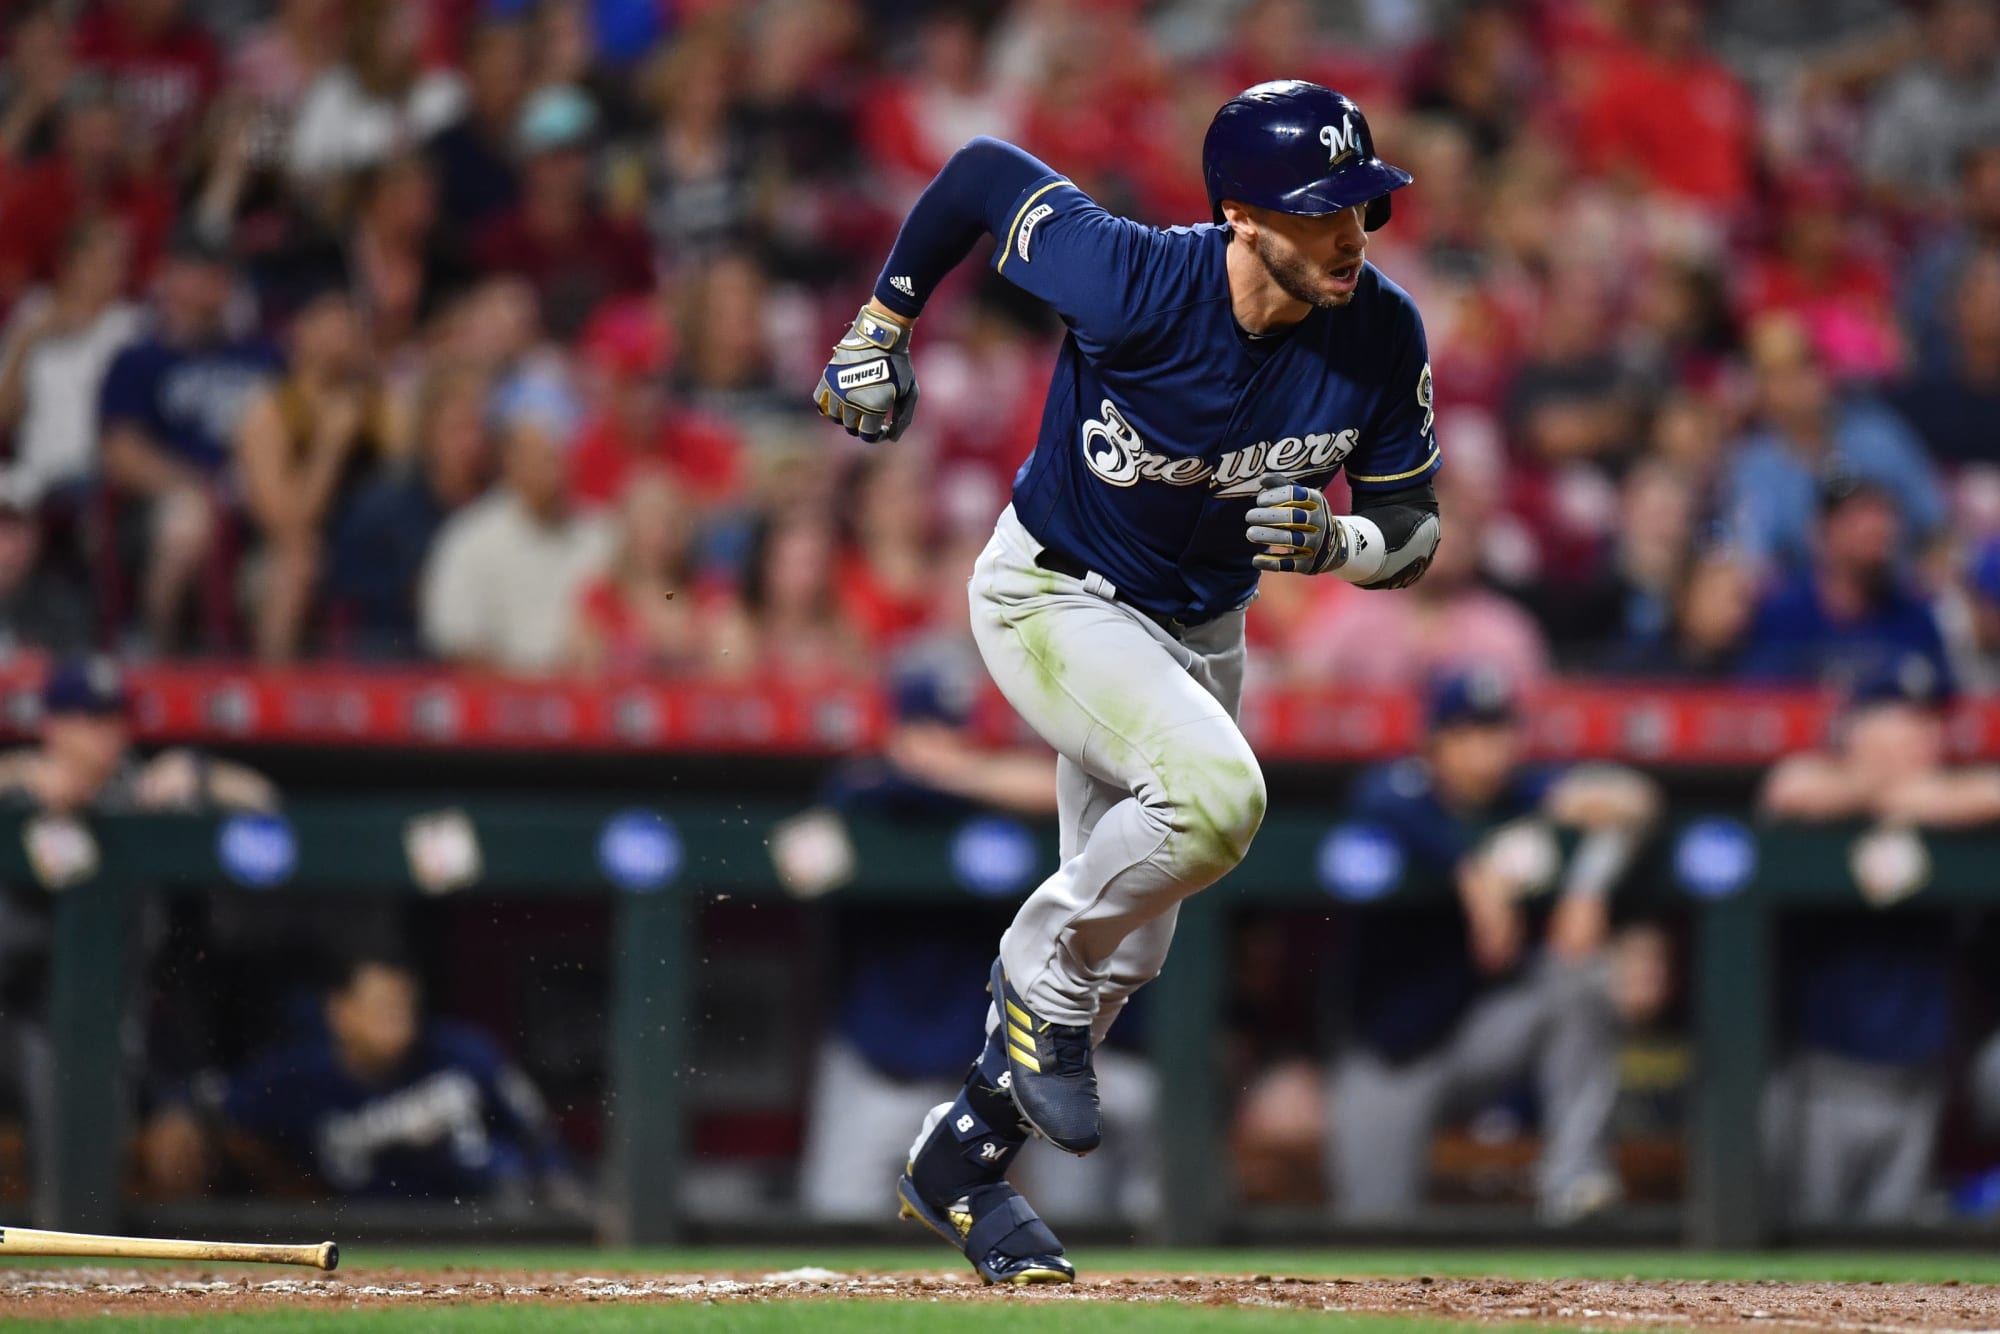 Milwaukee Brewers Magic Number Down To 1 After Win vs. Reds